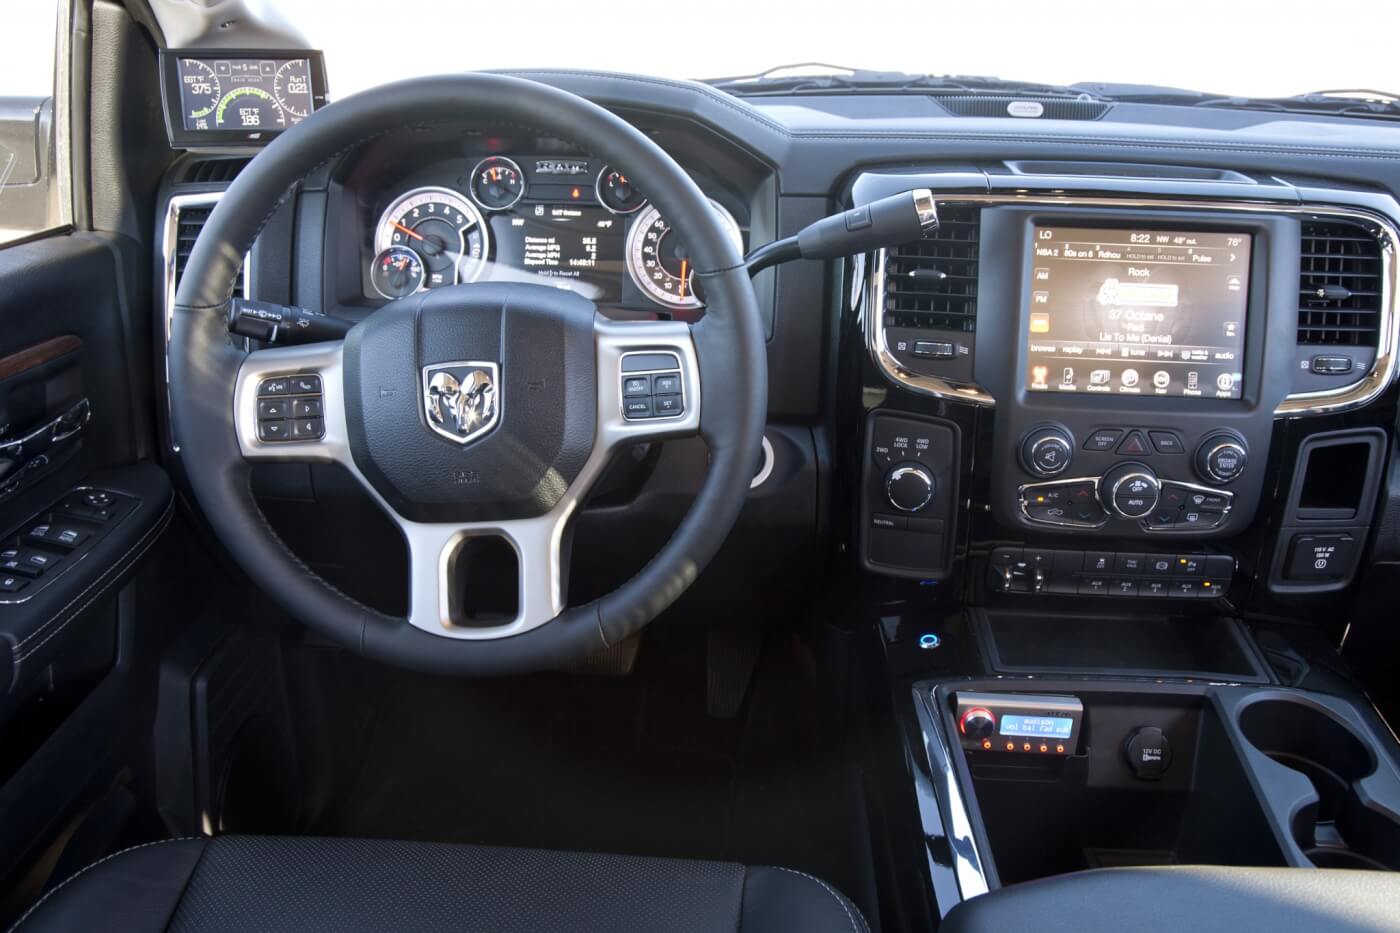 The dash was kept mainly stock with the exception of an Edge CTS and controller for the truck’s stereo system.